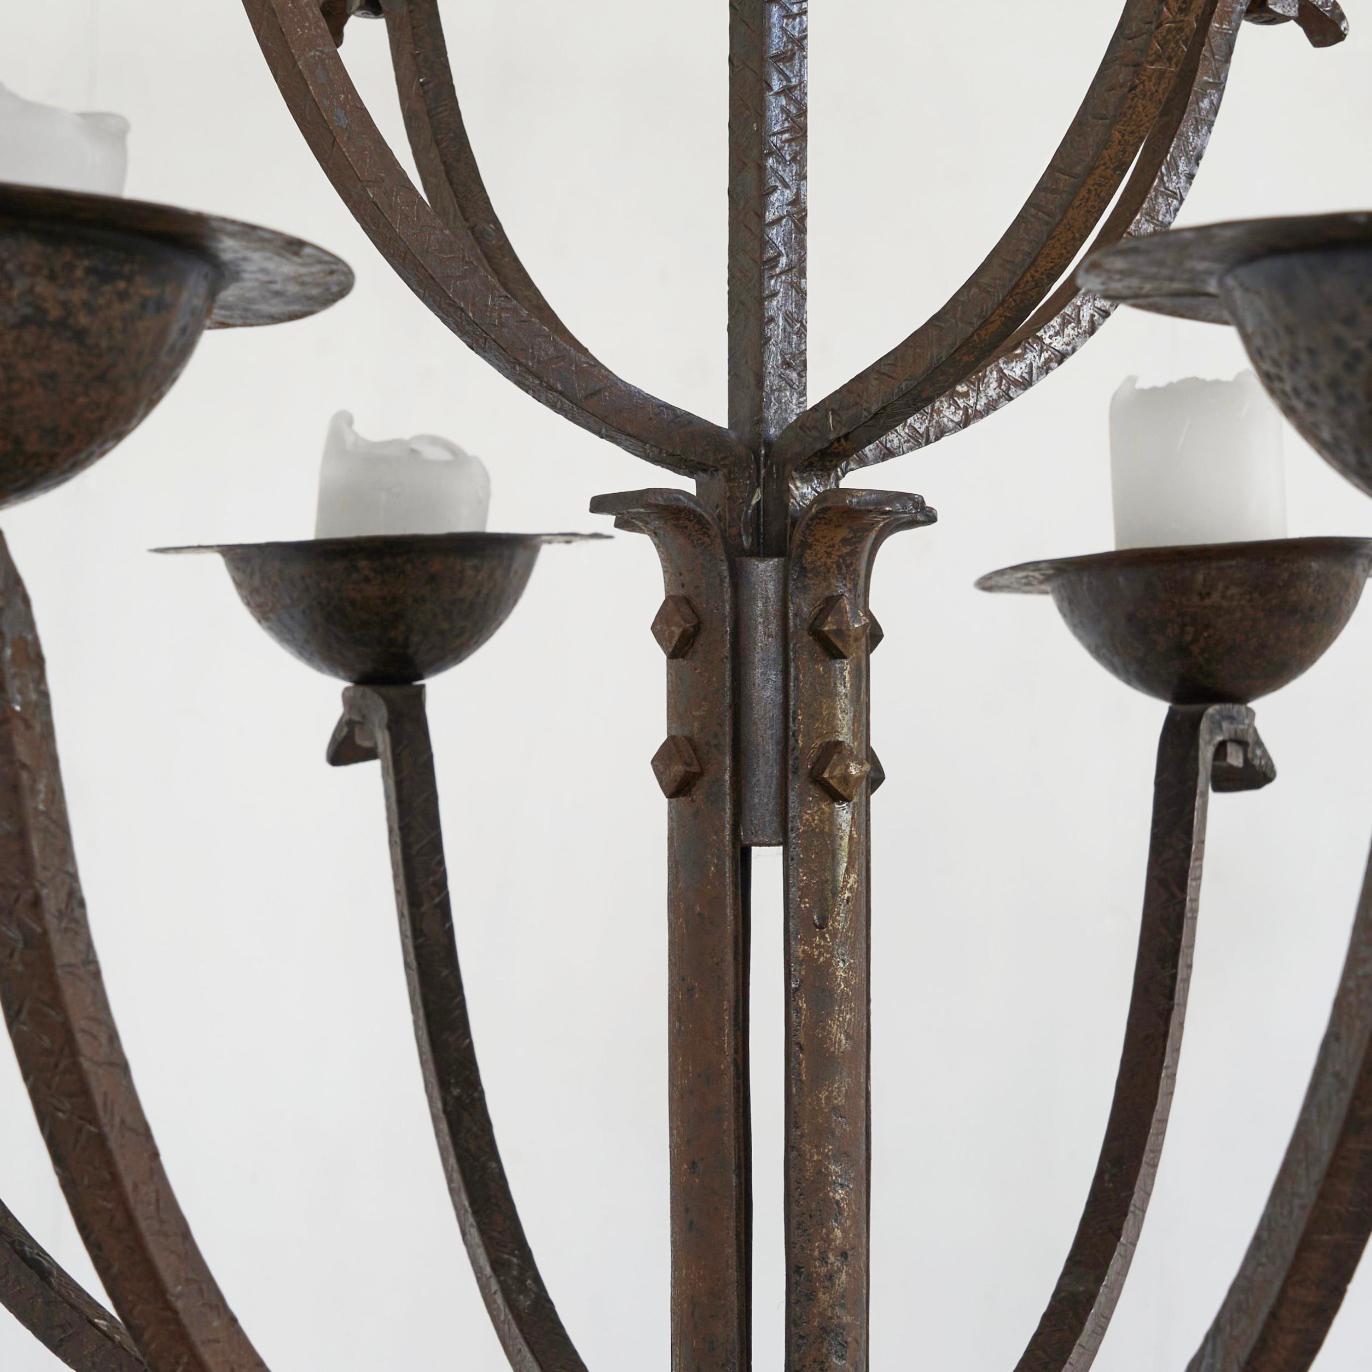 Amsterdam School Monumental Pair of Hand Forged Art Deco Candle Holders 1930s